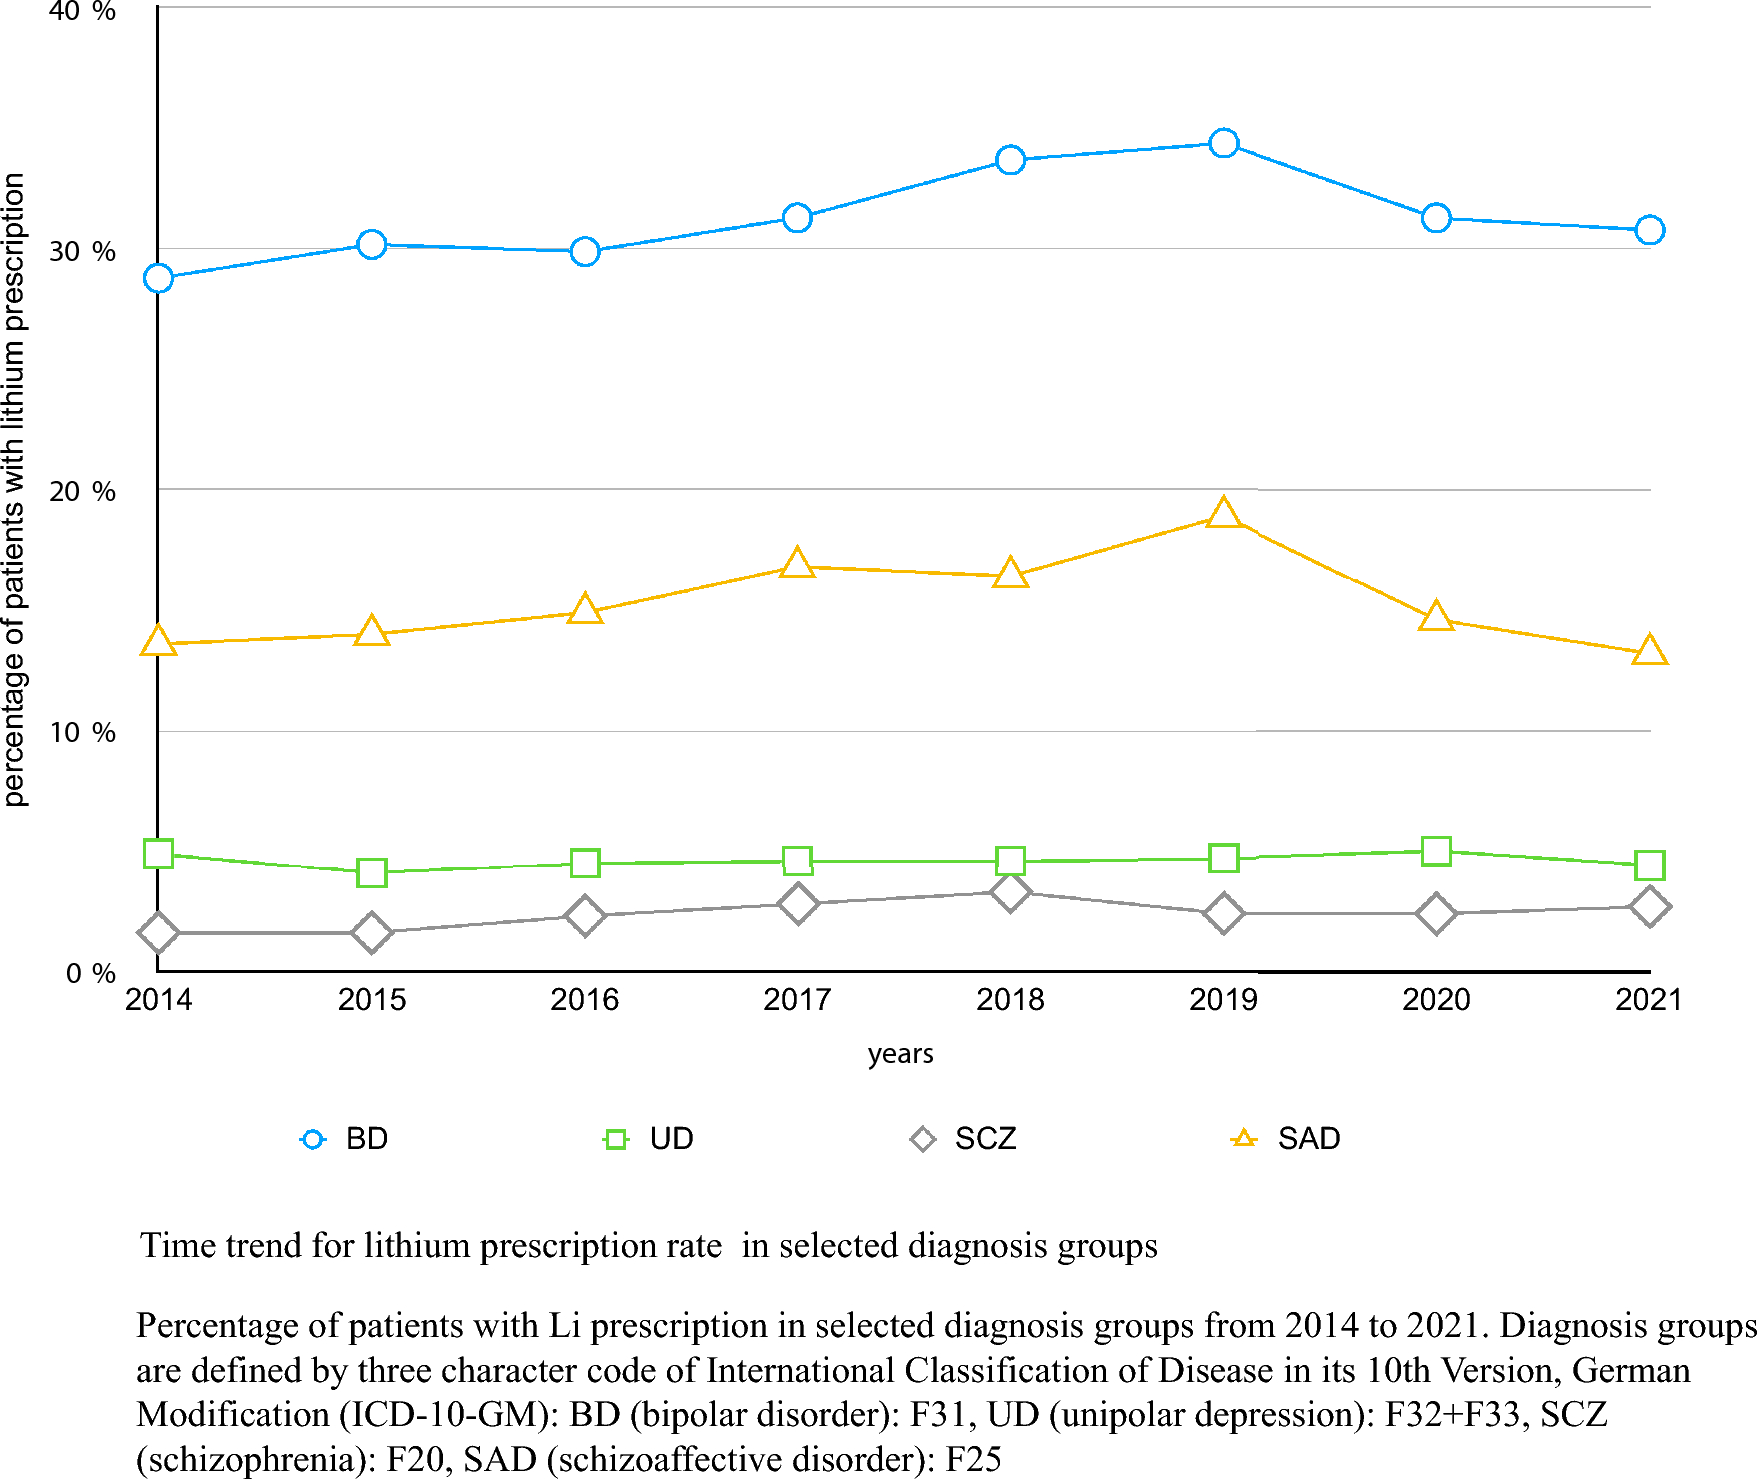 Lithium prescription trends in psychiatric inpatient care 2014 to 2021: data from a Bavarian drug surveillance project